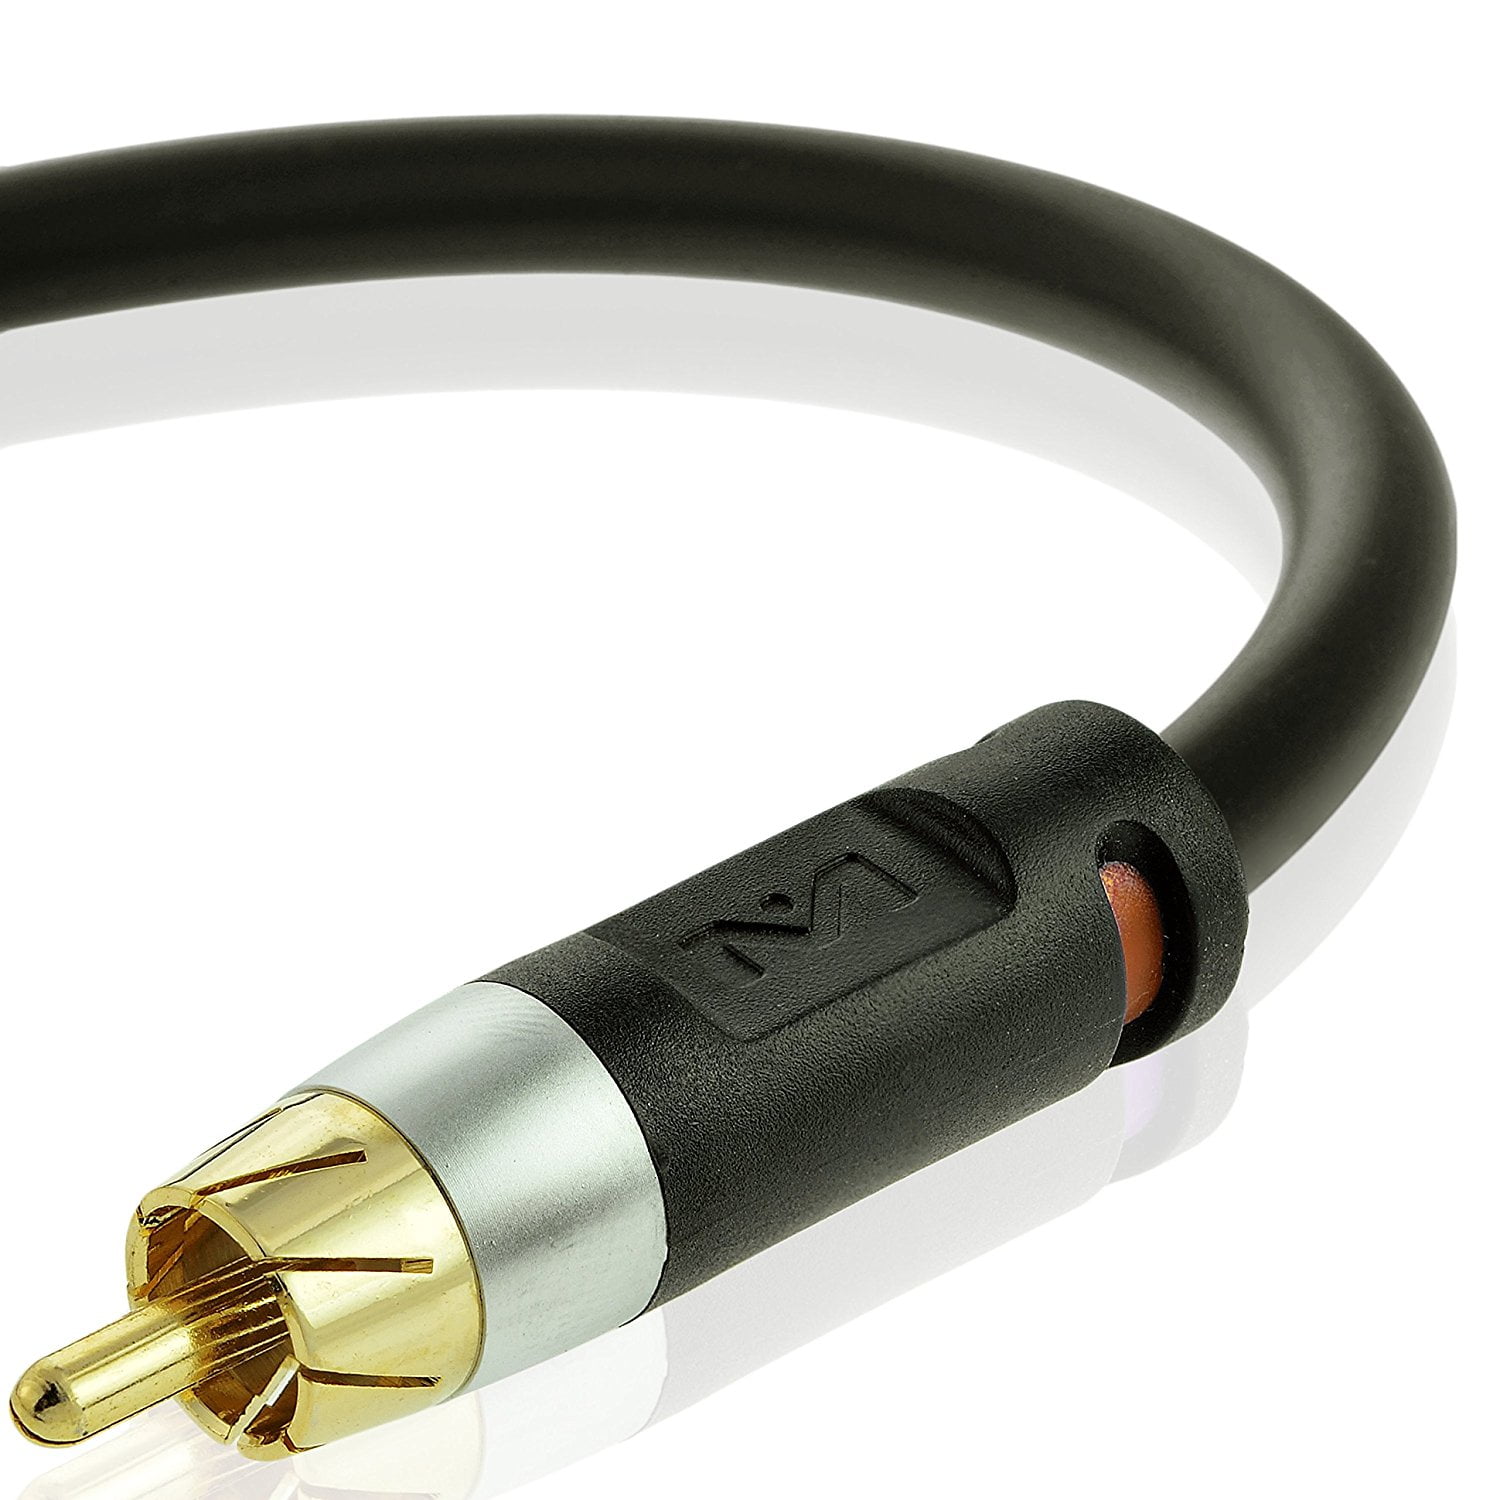 Mediabridge ULTRA Series Digital Audio Coaxial Cable (2 Feet) - Dual Shielded with RCA to RCA Gold-Plated Connectors - Black - (Part# CJ02-6BR-G2 )